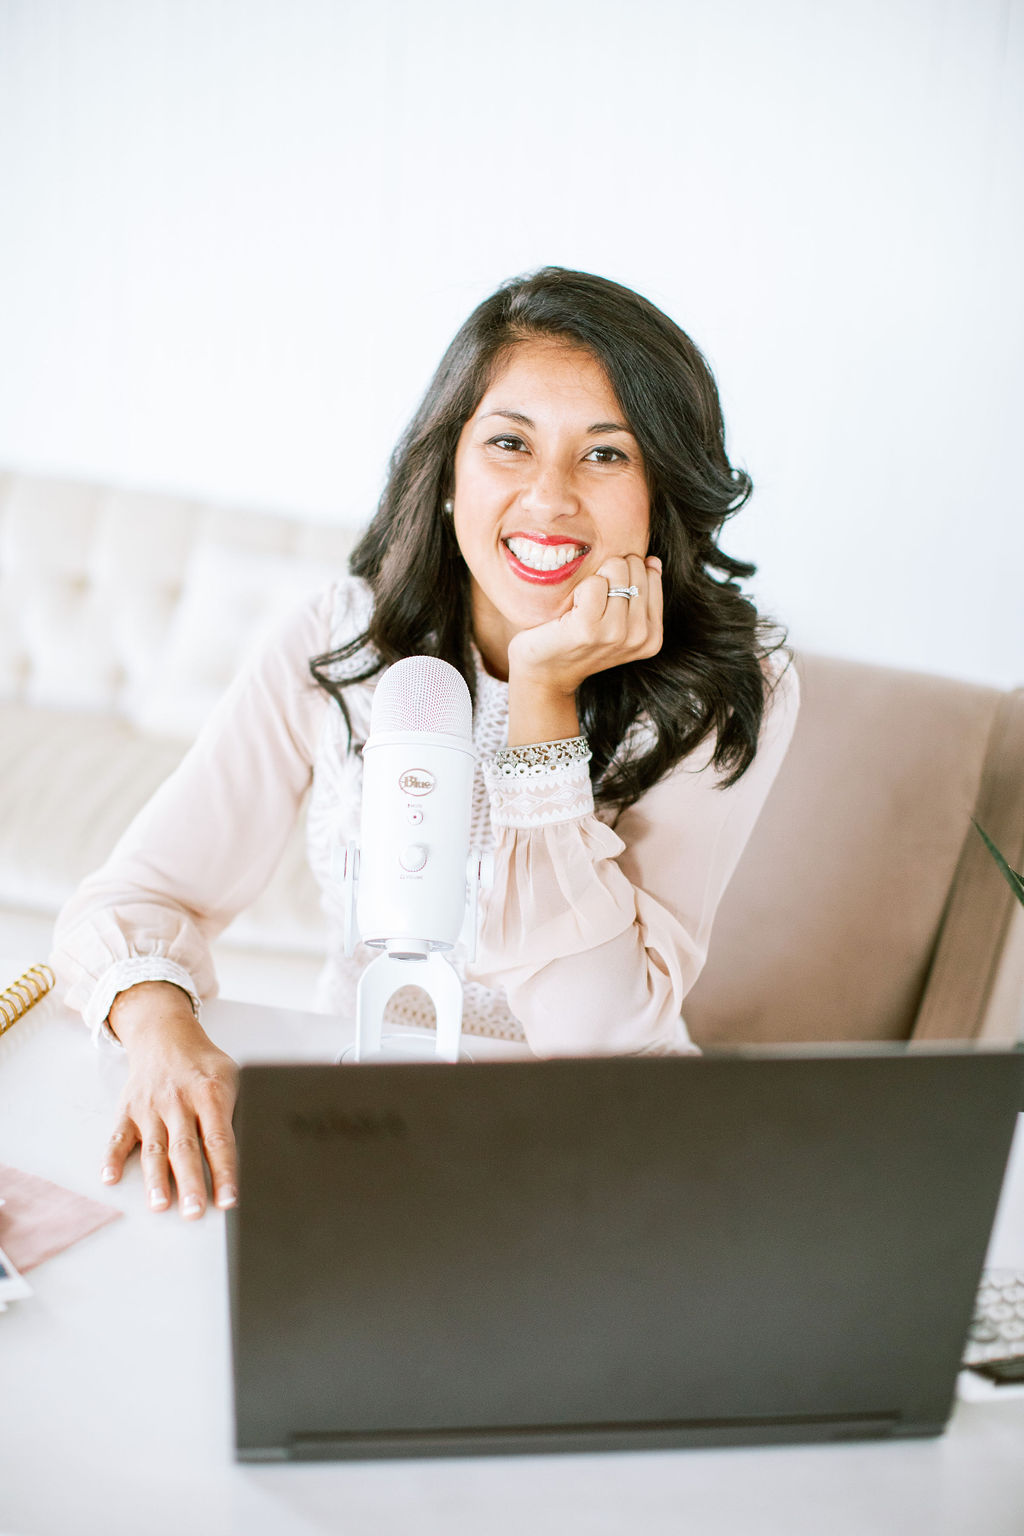 A woman with dark hair, smiling, sits at a desk with a laptop and a white microphone in front of her, starting a podcast.